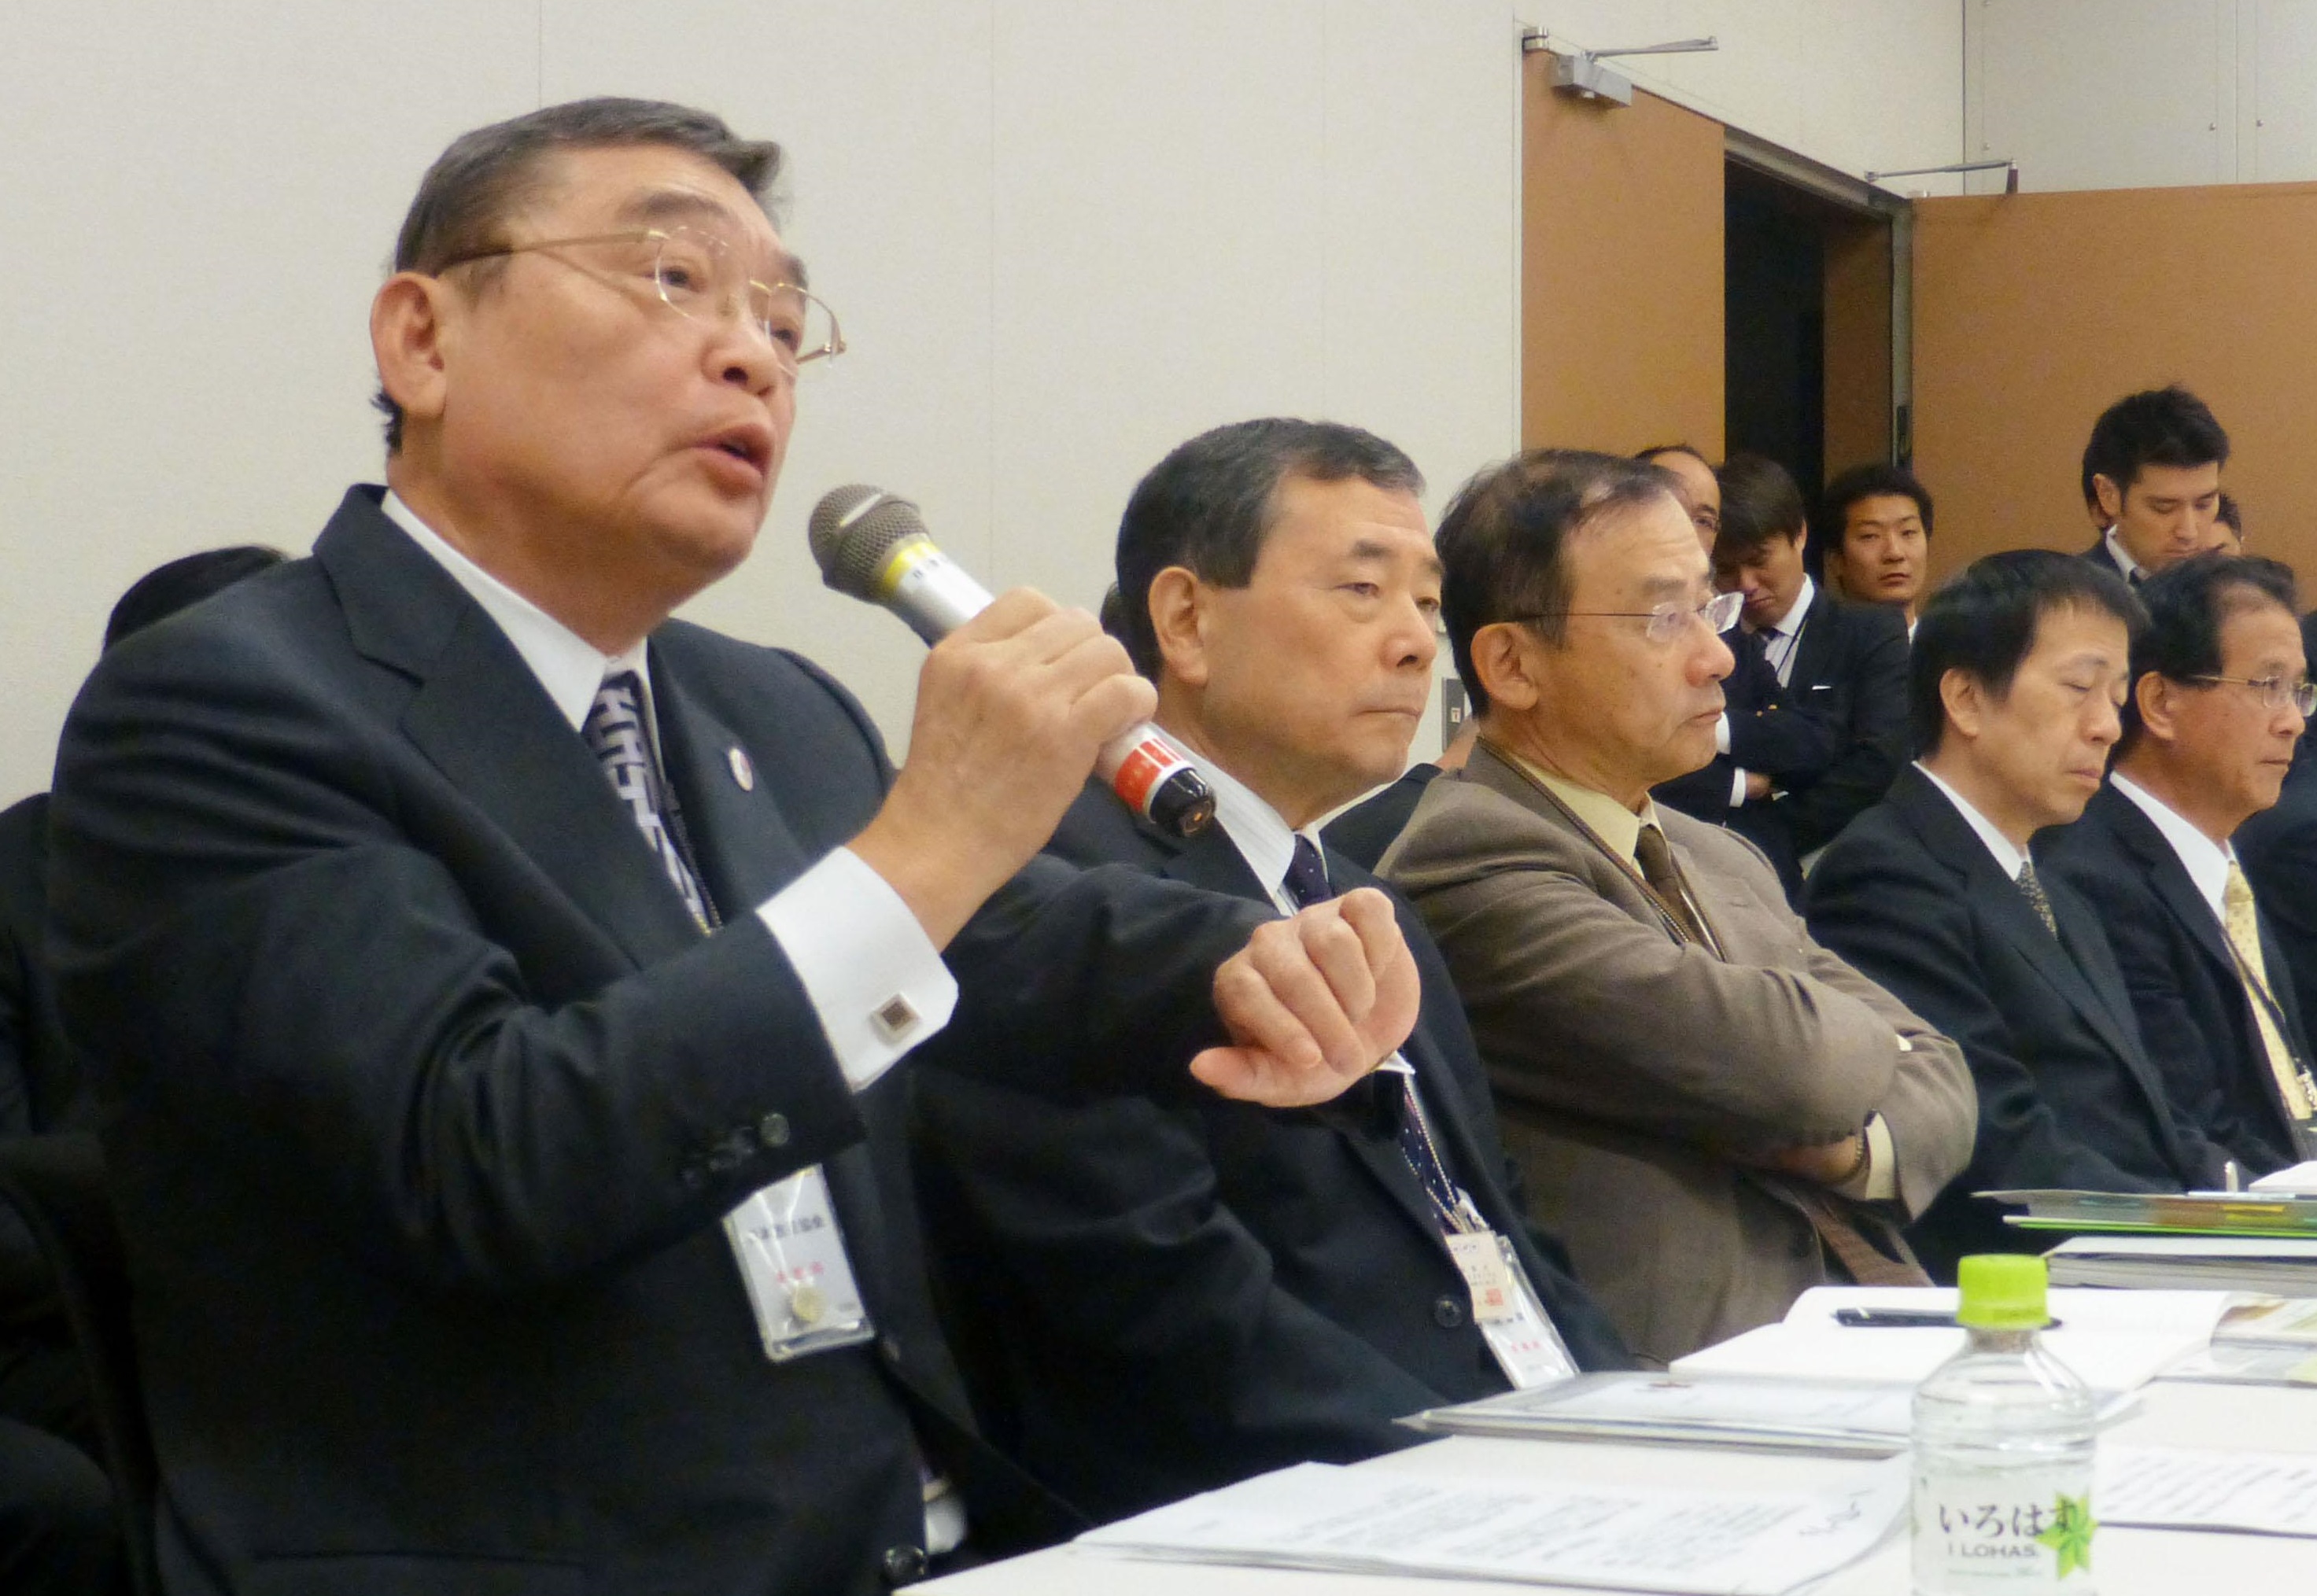 NHK Chairman Katsuto Momii takes a grilling from Democratic Party of Japan lawmakers in Tokyo on Wednesday. | KYODO